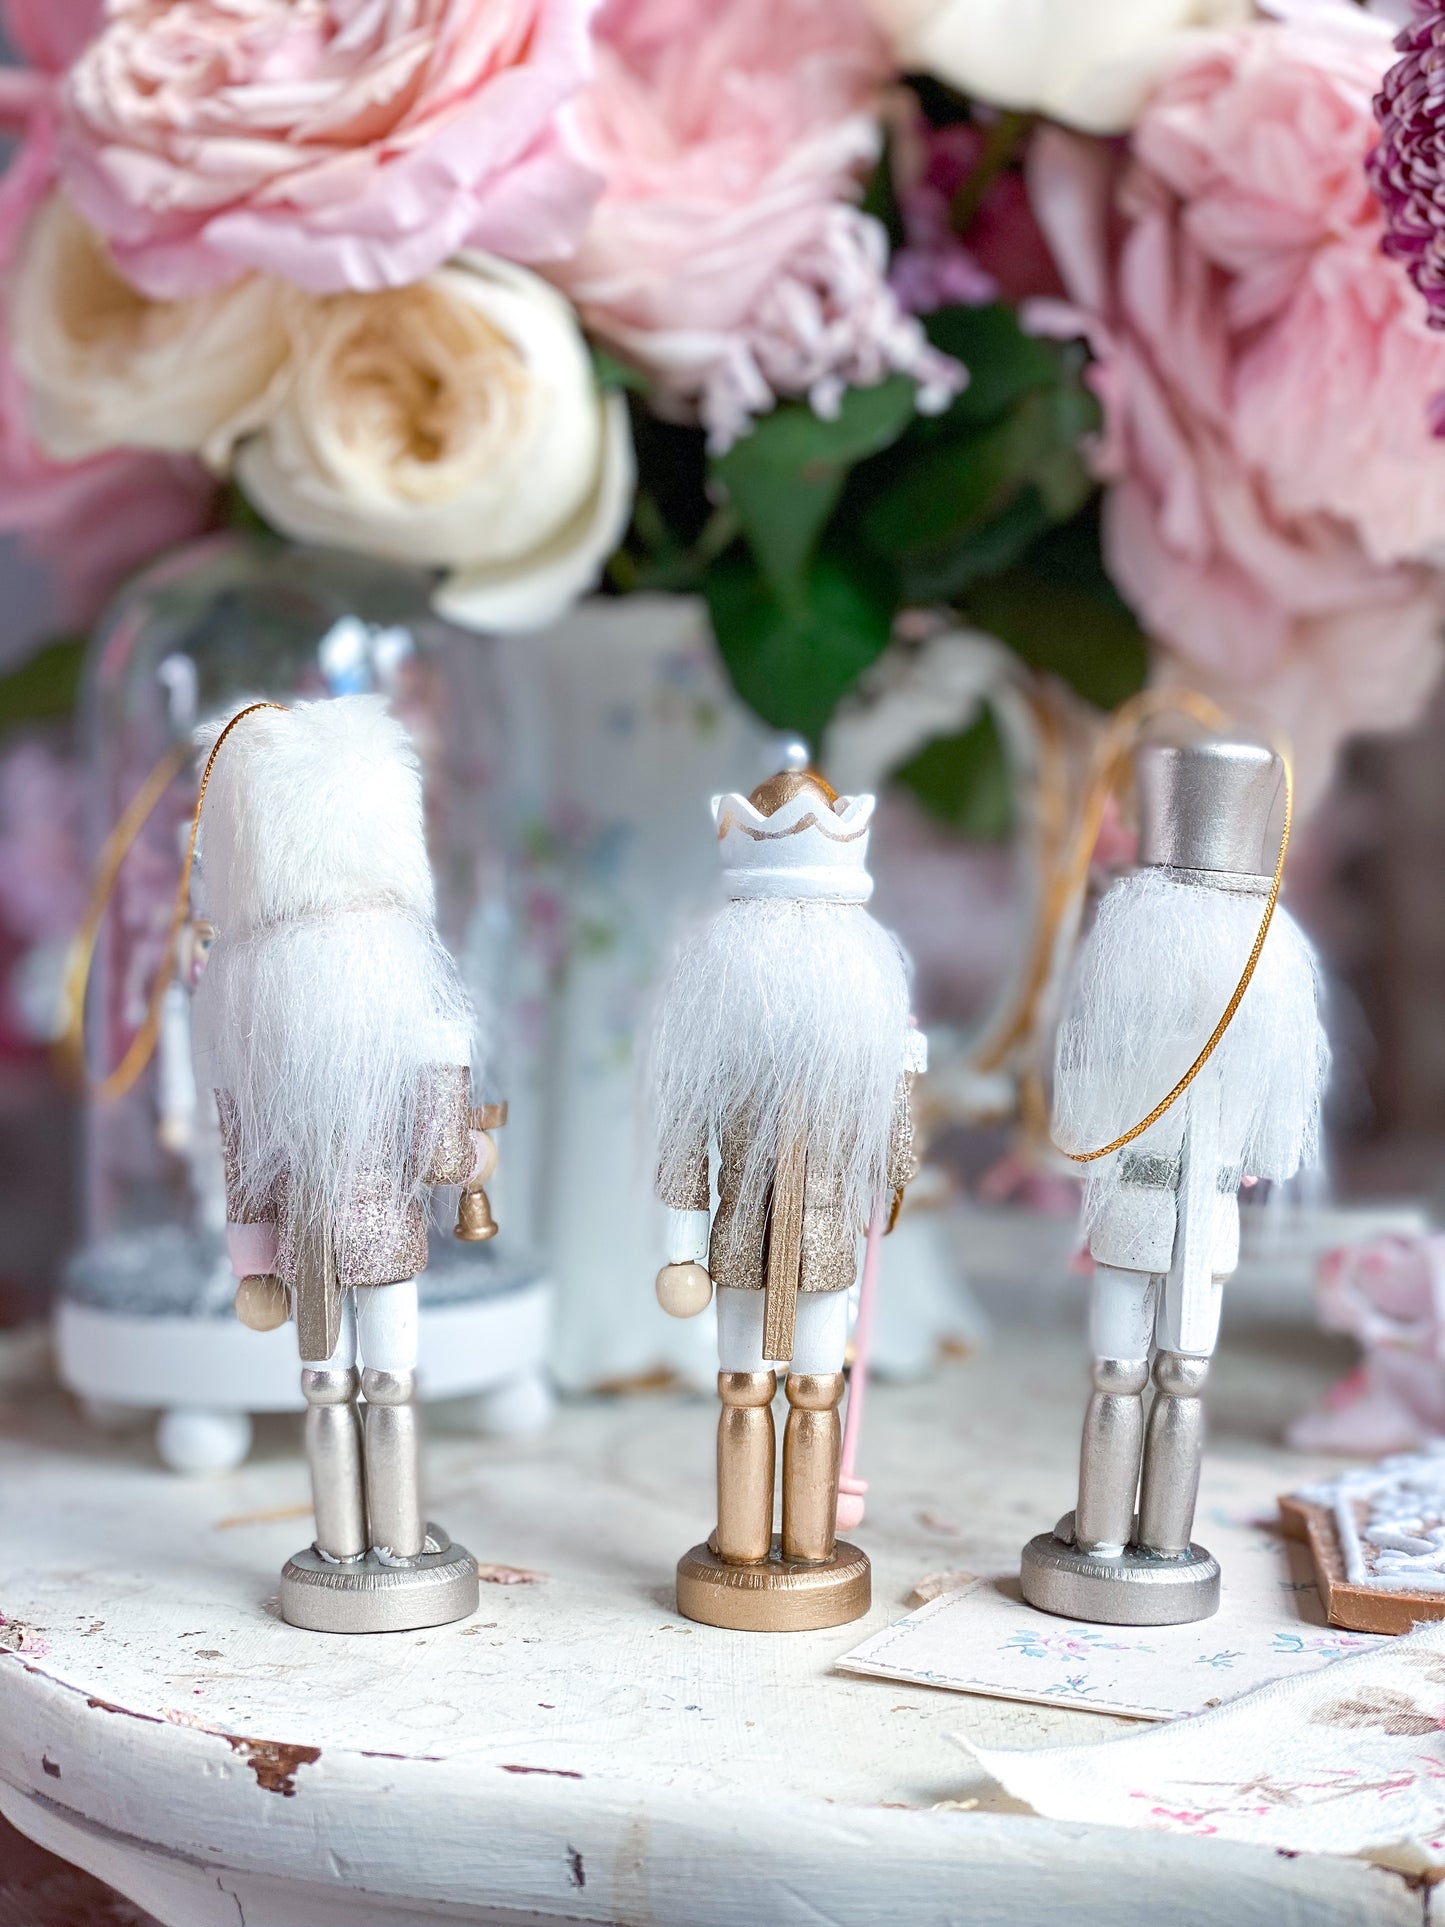 Set of 3 Rose Gold and Pink Nutcracker Ornaments